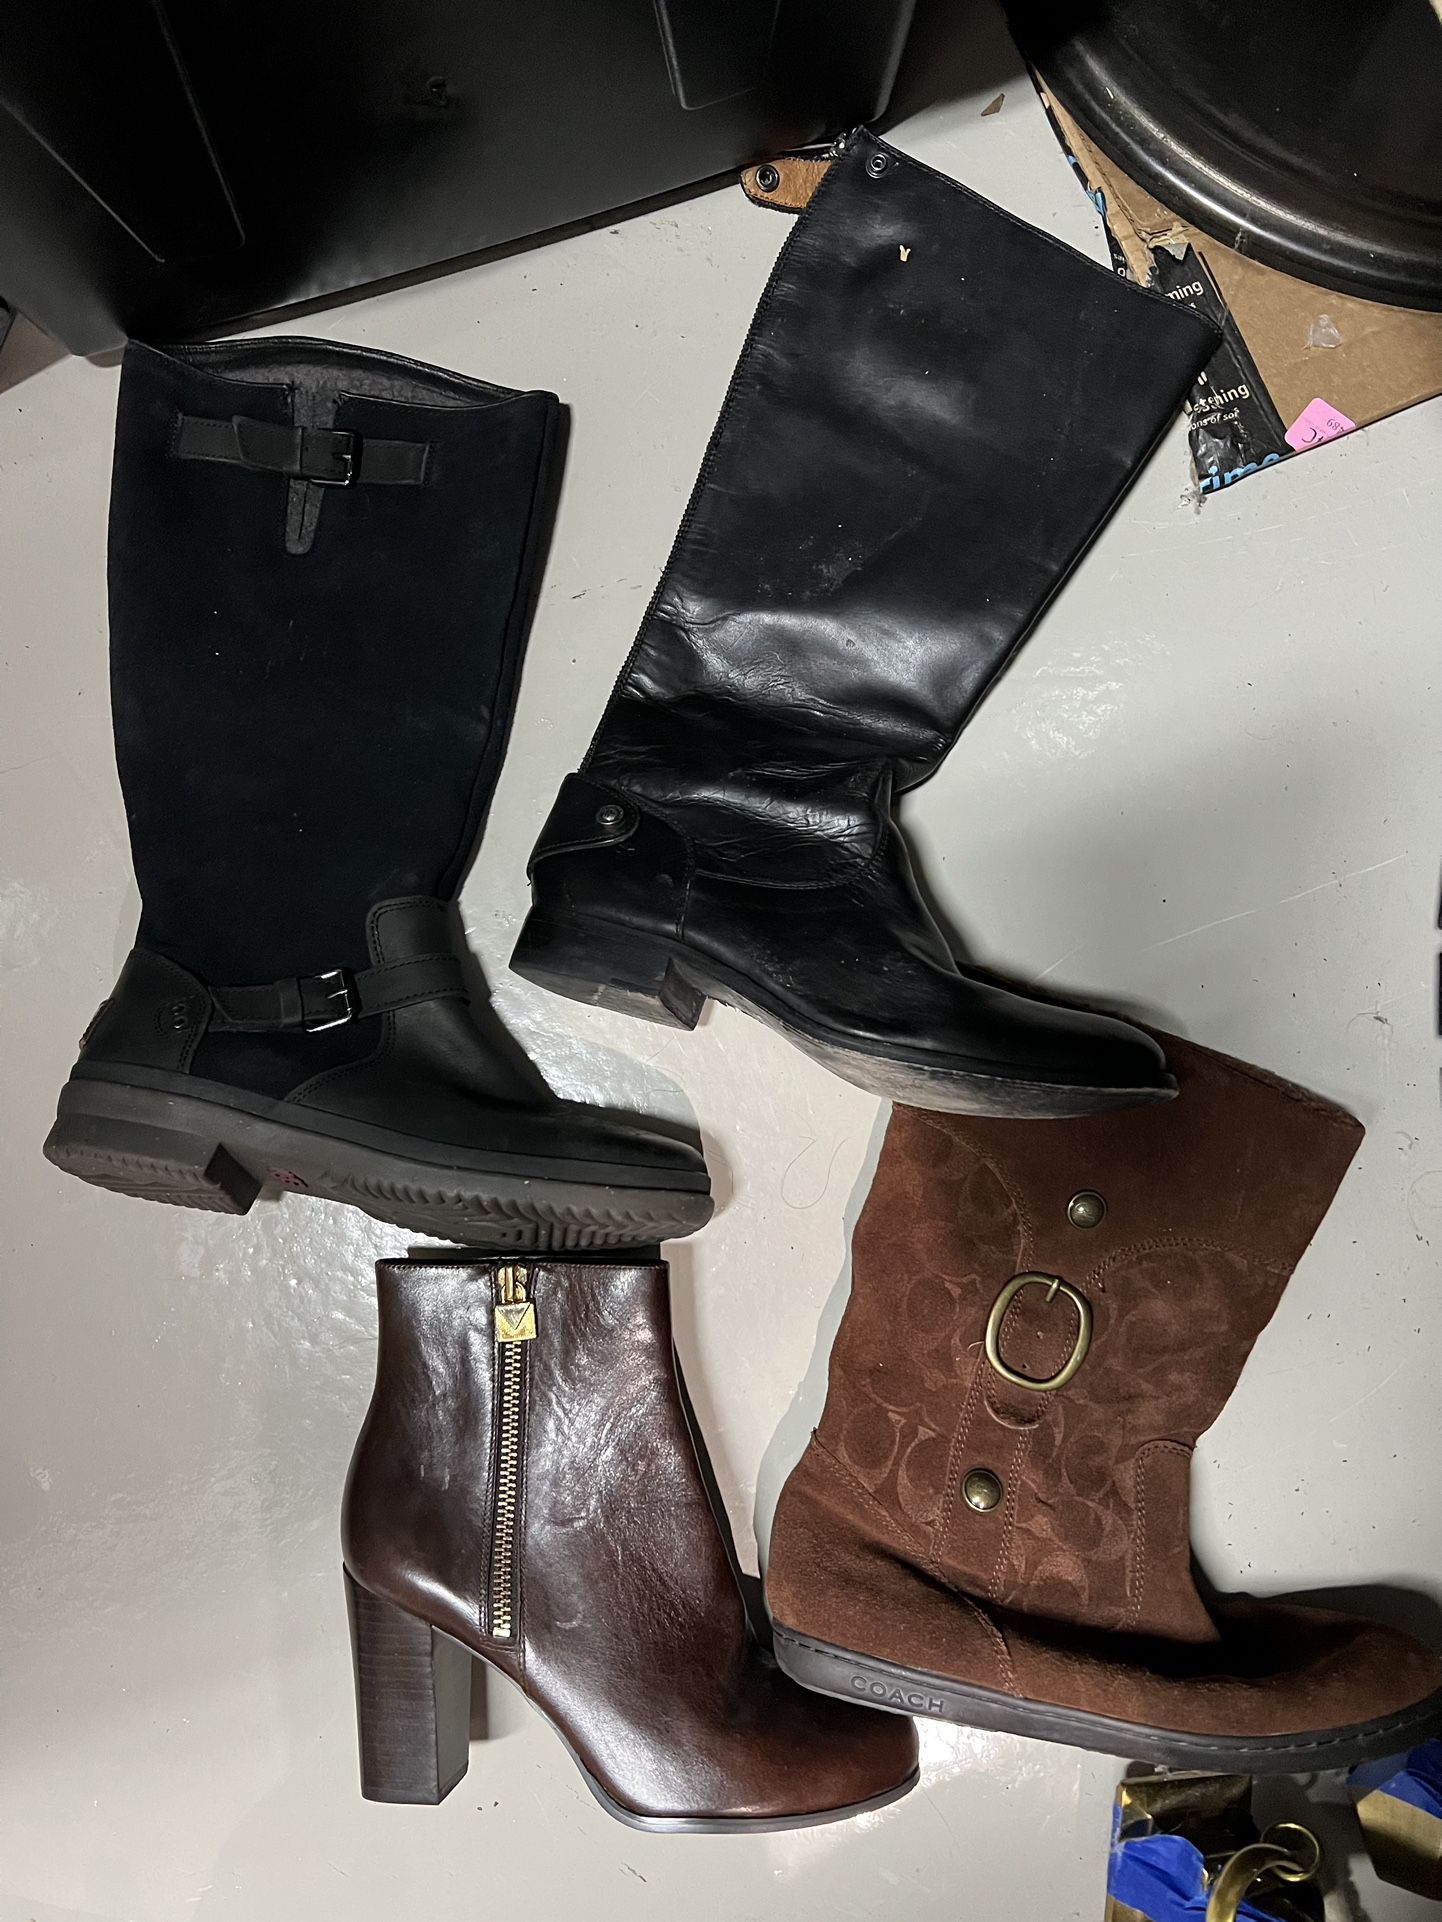 DESIGNER BOOTS (LIKE NEW CONDITION) - $60